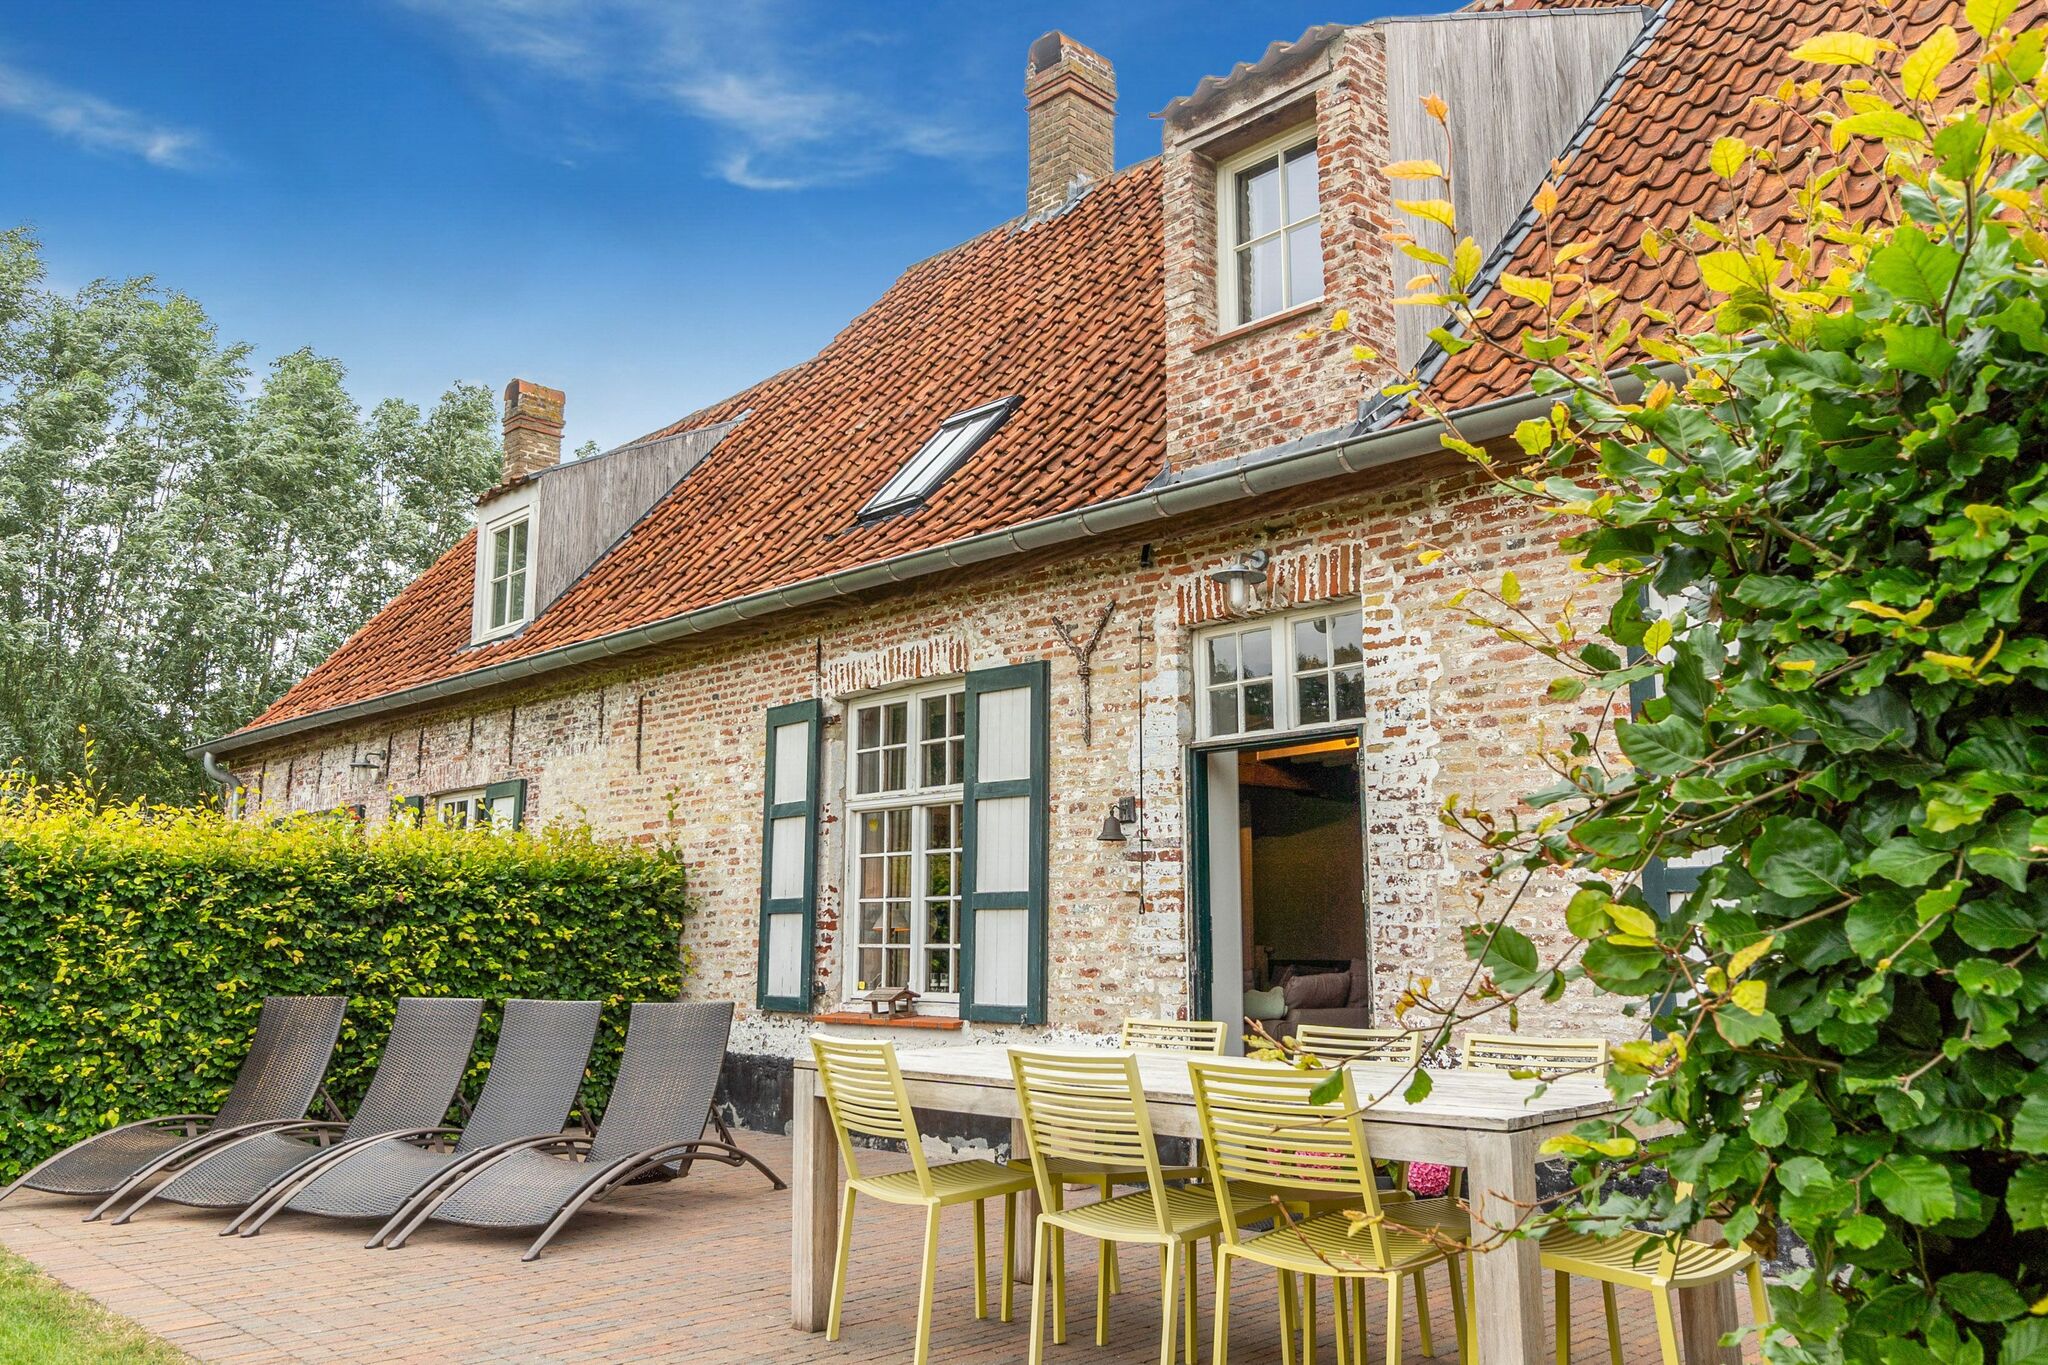 Manor House is part of an authentic farm complex in the middle of the polder landscape near Damme.